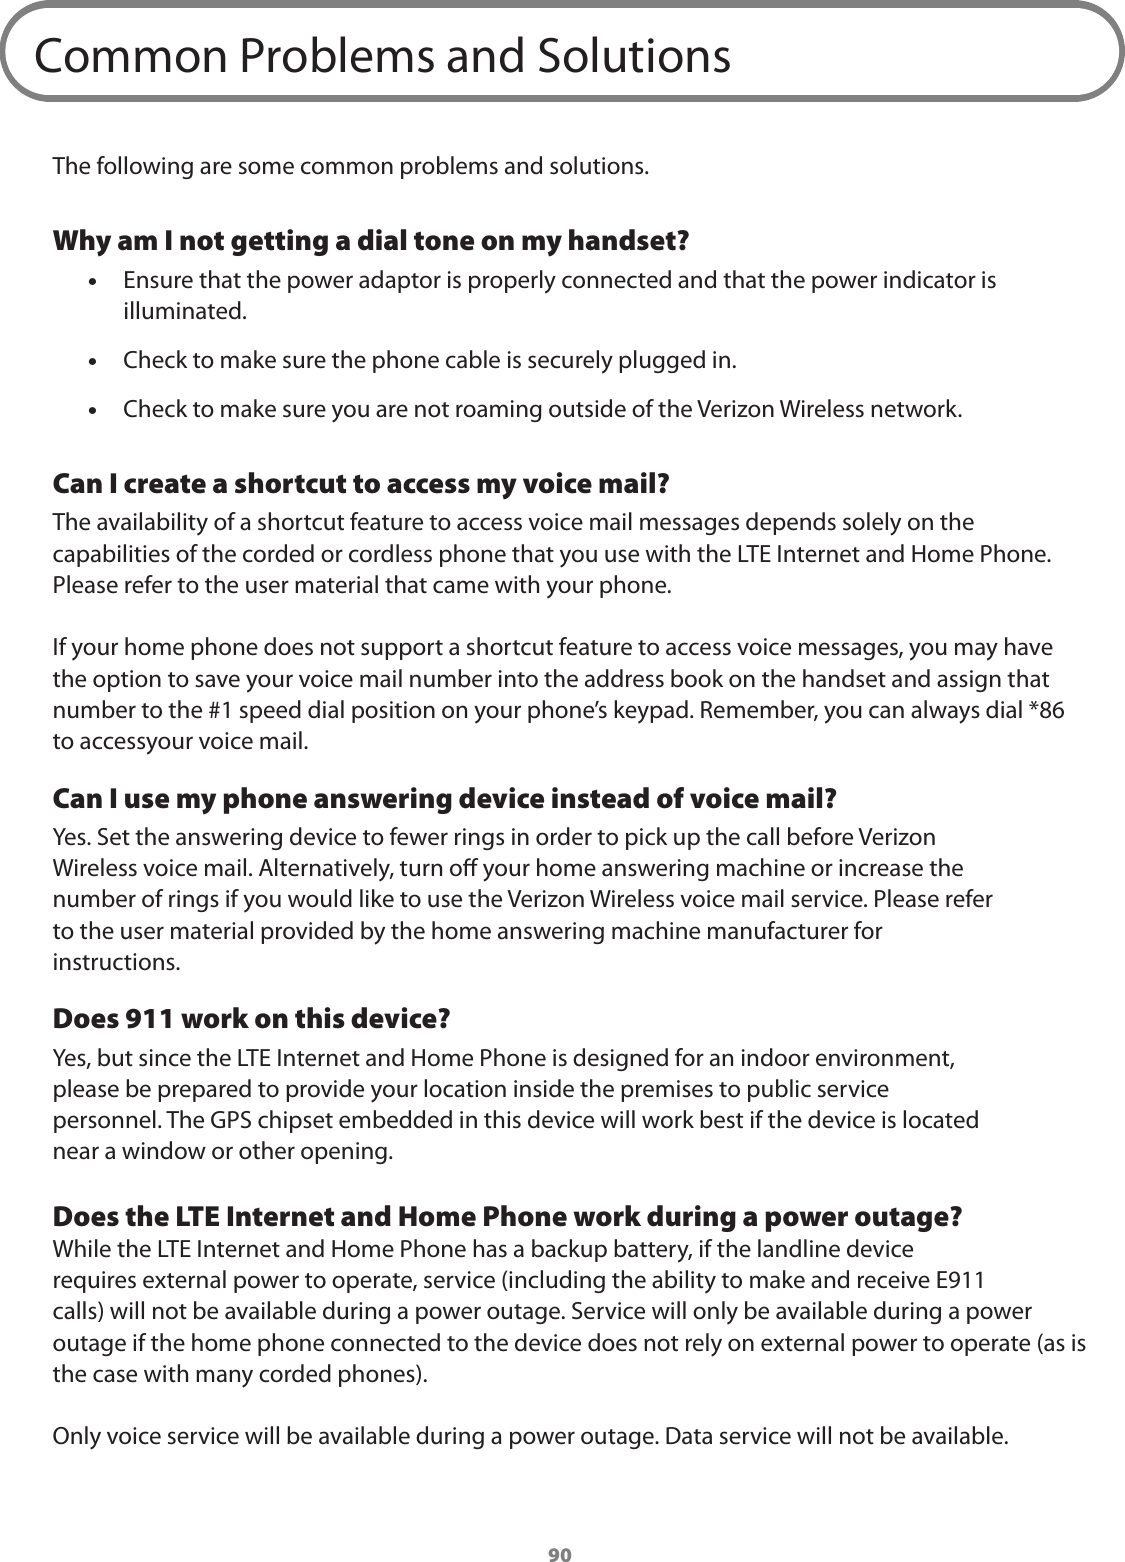 90Common Problems and SolutionsThe following are some common problems and solutions.Why am I not getting a dial tone on my handset? •Ensure that the power adaptor is properly connected and that the power indicator is illuminated. •Check to make sure the phone cable is securely plugged in. •Check to make sure you are not roaming outside of the Verizon Wireless network.Can I create a shortcut to access my voice mail?The availability of a shortcut feature to access voice mail messages depends solely on the capabilities of the corded or cordless phone that you use with the LTE Internet and Home Phone. Please refer to the user material that came with your phone.If your home phone does not support a shortcut feature to access voice messages, you may have the option to save your voice mail number into the address book on the handset and assign that number to the #1 speed dial position on your phone’s keypad. Remember, you can always dial *86 to accessyour voice mail.Can I use my phone answering device instead of voice mail?Yes. Set the answering device to fewer rings in order to pick up the call before VerizonWireless voice mail. Alternatively, turn o your home answering machine or increase thenumber of rings if you would like to use the Verizon Wireless voice mail service. Please referto the user material provided by the home answering machine manufacturer forinstructions.Does 911 work on this device?Yes, but since the LTE Internet and Home Phone is designed for an indoor environment,please be prepared to provide your location inside the premises to public servicepersonnel. The GPS chipset embedded in this device will work best if the device is locatednear a window or other opening.Does the LTE Internet and Home Phone work during a power outage?While the LTE Internet and Home Phone has a backup battery, if the landline devicerequires external power to operate, service (including the ability to make and receive E911calls) will not be available during a power outage. Service will only be available during a power outage if the home phone connected to the device does not rely on external power to operate (as is the case with many corded phones).Only voice service will be available during a power outage. Data service will not be available.